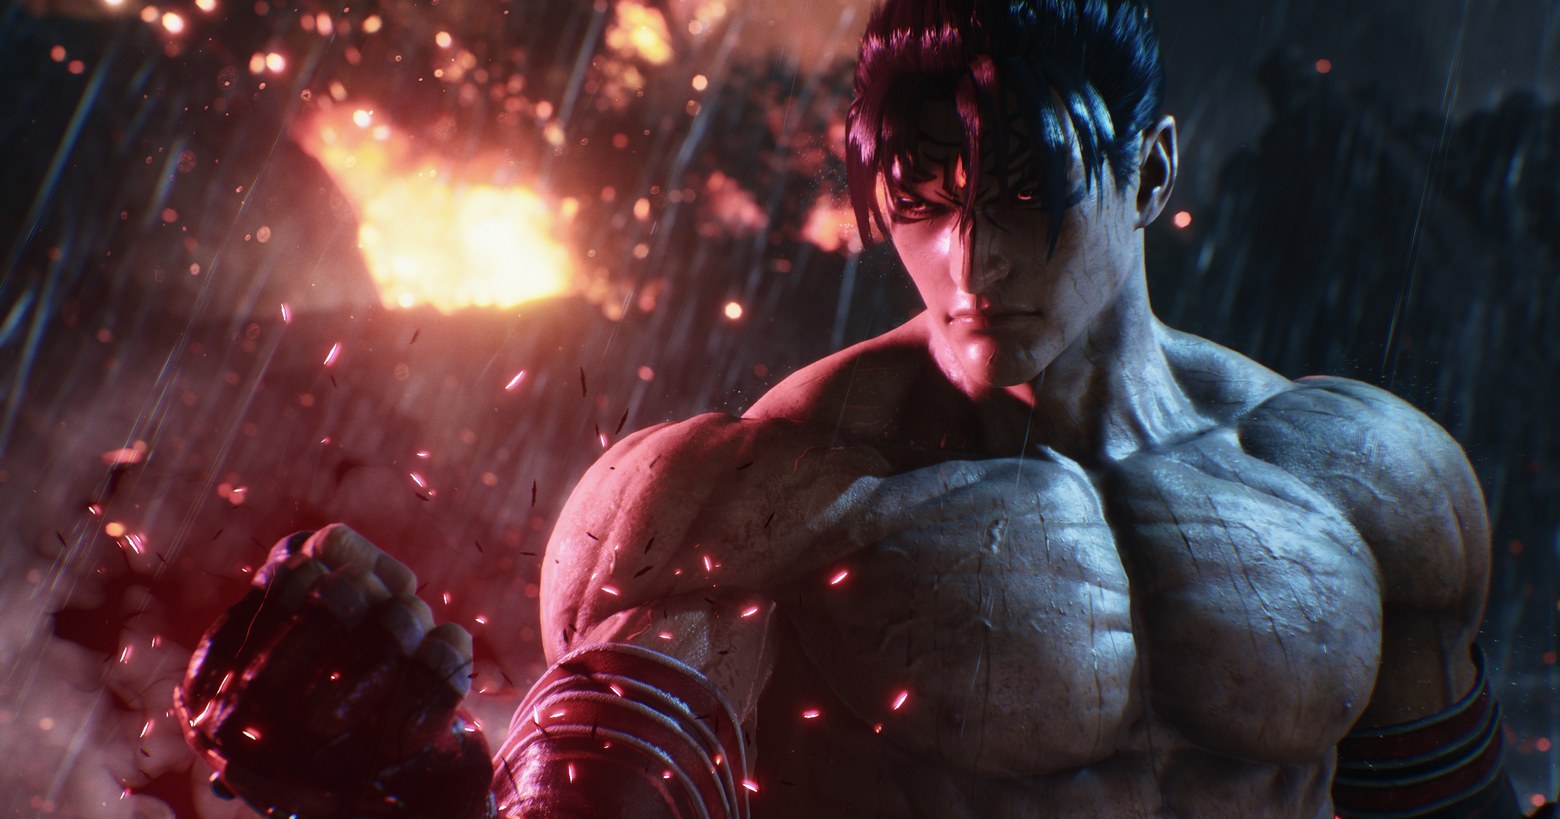 In this screenshot from Tekken 8, we catch a glimpse of a playable character in the near. He is in a harsh dark and rainy environment. The character has a muscular free torso and black hair tied back. He clenches his right hand into a fist, which he scowls at, with red sparks coming out of it. At the same time, a kind of explosion takes place in the back left, so that his back and the left side of his face are illuminated in red. The game doesn't have a release date yet, but there are already several gameplay trailers that also show many characters.